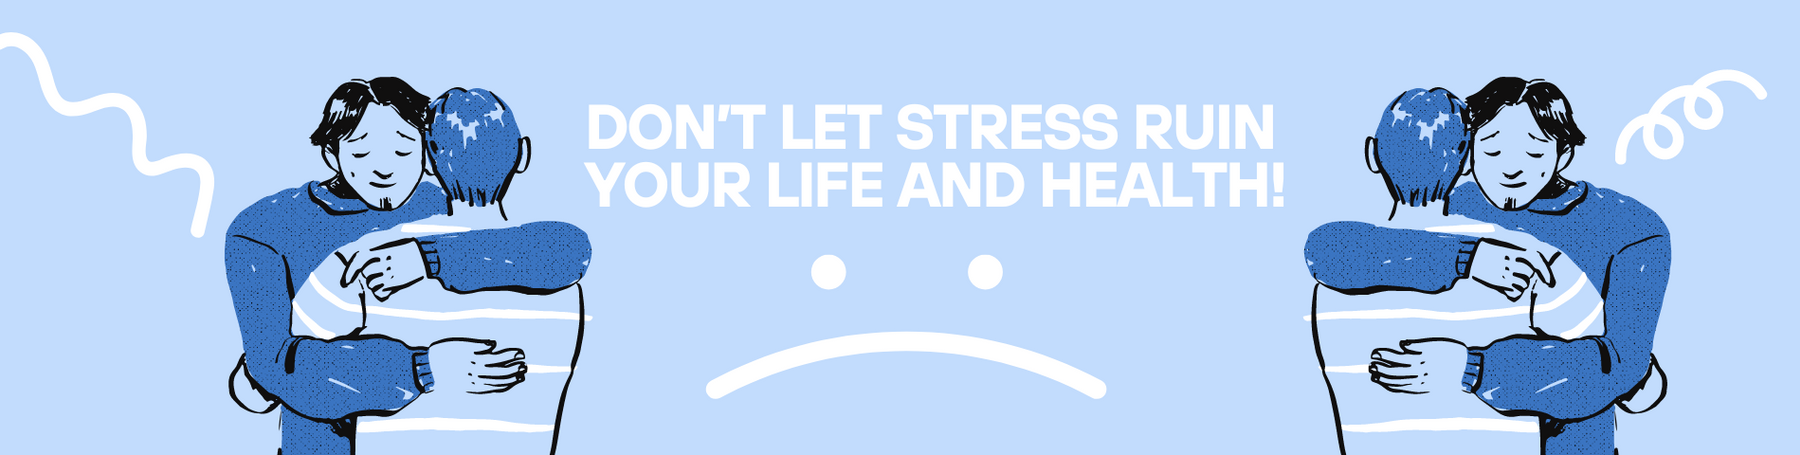 Don't let stress ruin your life and health! Reduce stress, improve mood, focus, and energy 😄